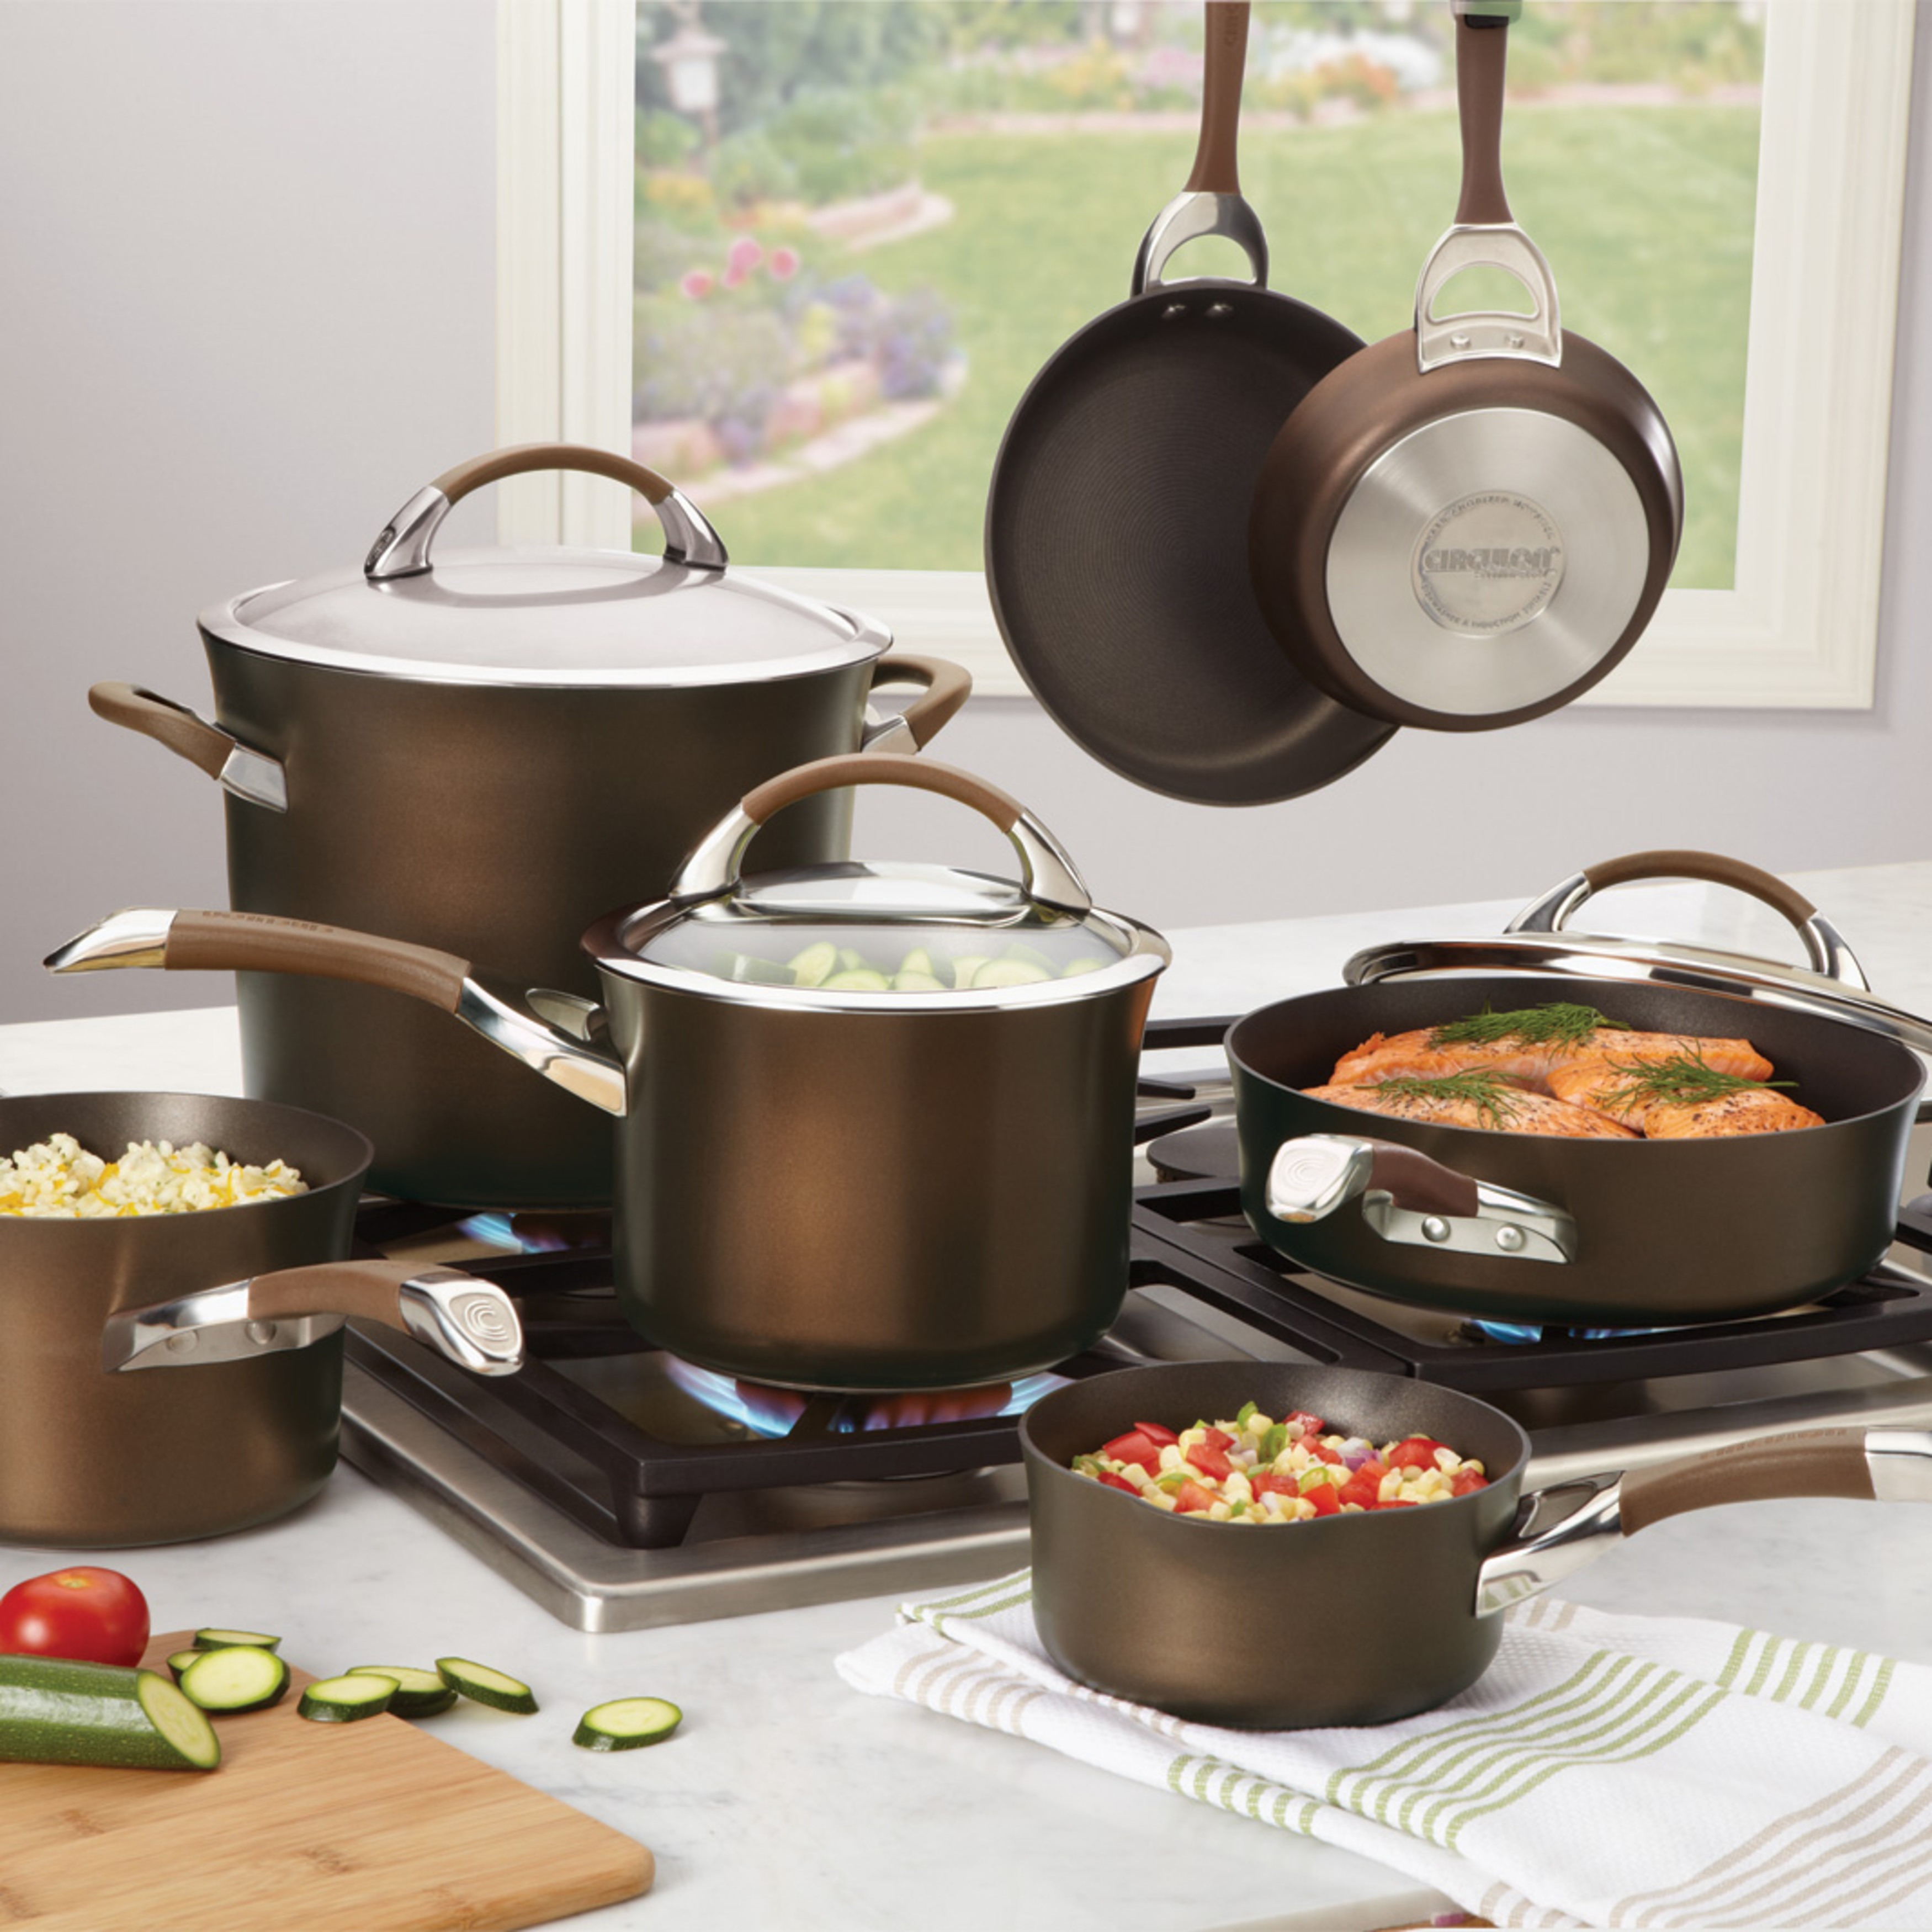 Circulon Symmetry Chocolate Hard-anodized Nonstick 11-piece Cookware Set  (As Is Item)